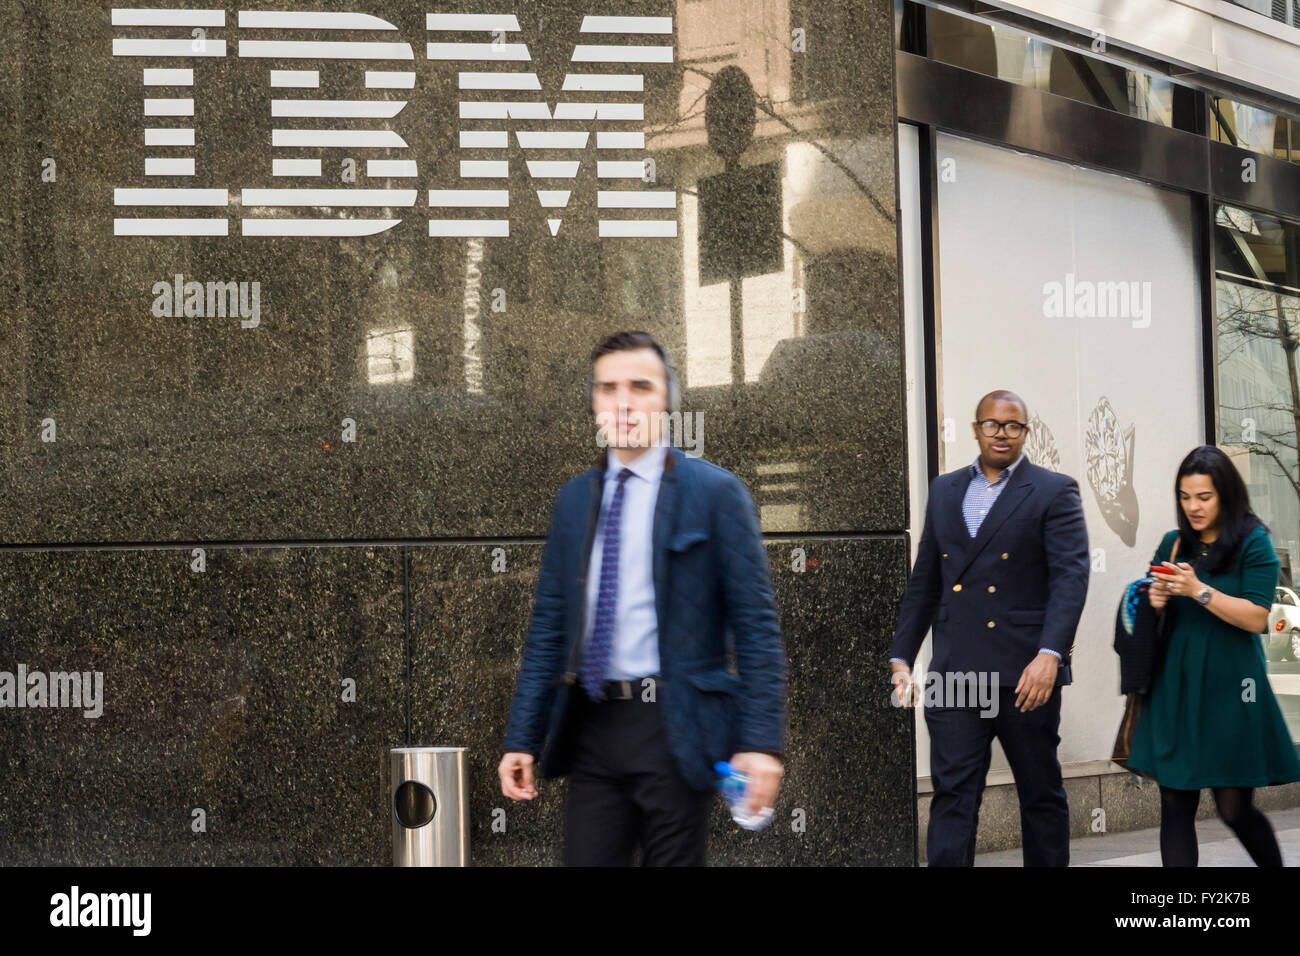 The IBM logo is seen on their building's headquarters in New York on Monday, April 18, 2016. IBM is scheduled to release its first-quarter earnings today after the bell,.(© Richard B. Levine) Stock Photo